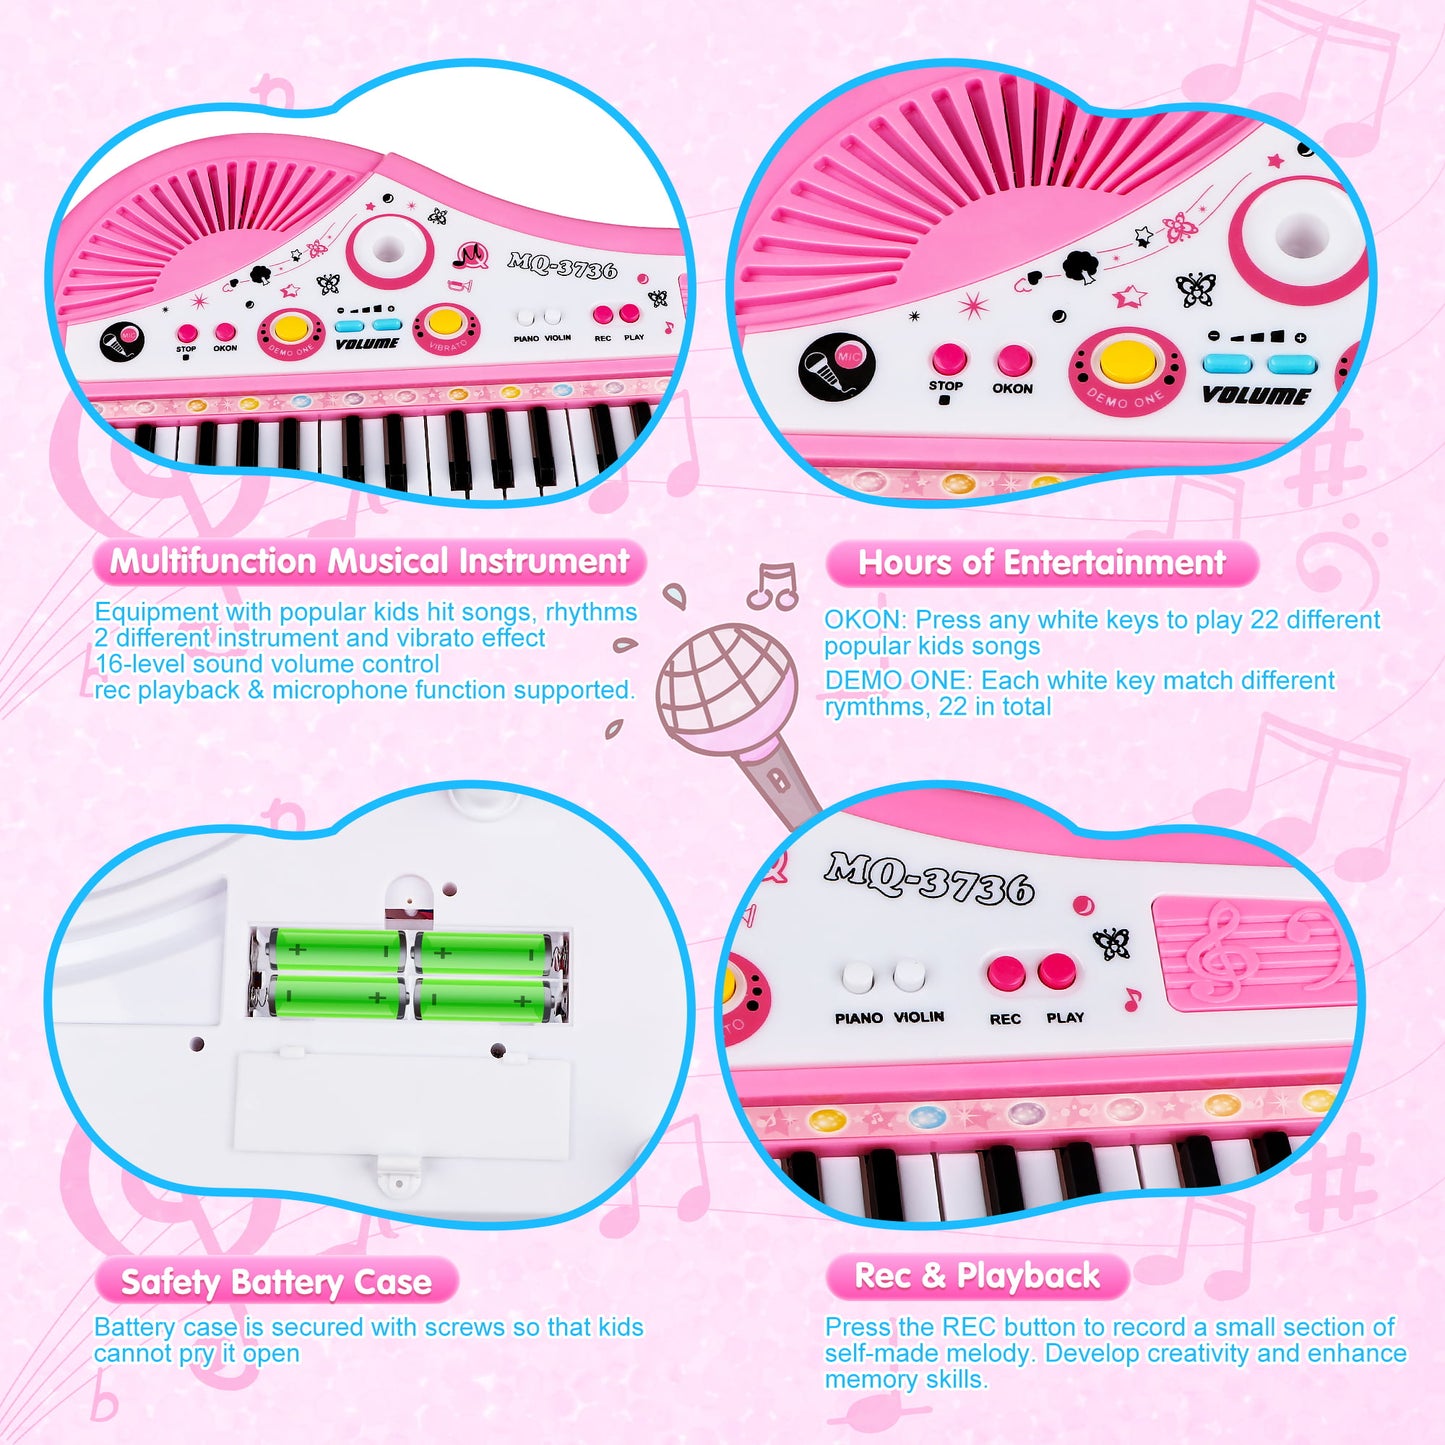 Pink Baby Piano Keyboard Toys for Kids, Musical Instrument with Microphone for Toddlers, Preschooler Music Learning Popular Piano Toys, Birthday Christmas Gift for Girls Boys Aged 3 4 5 6+